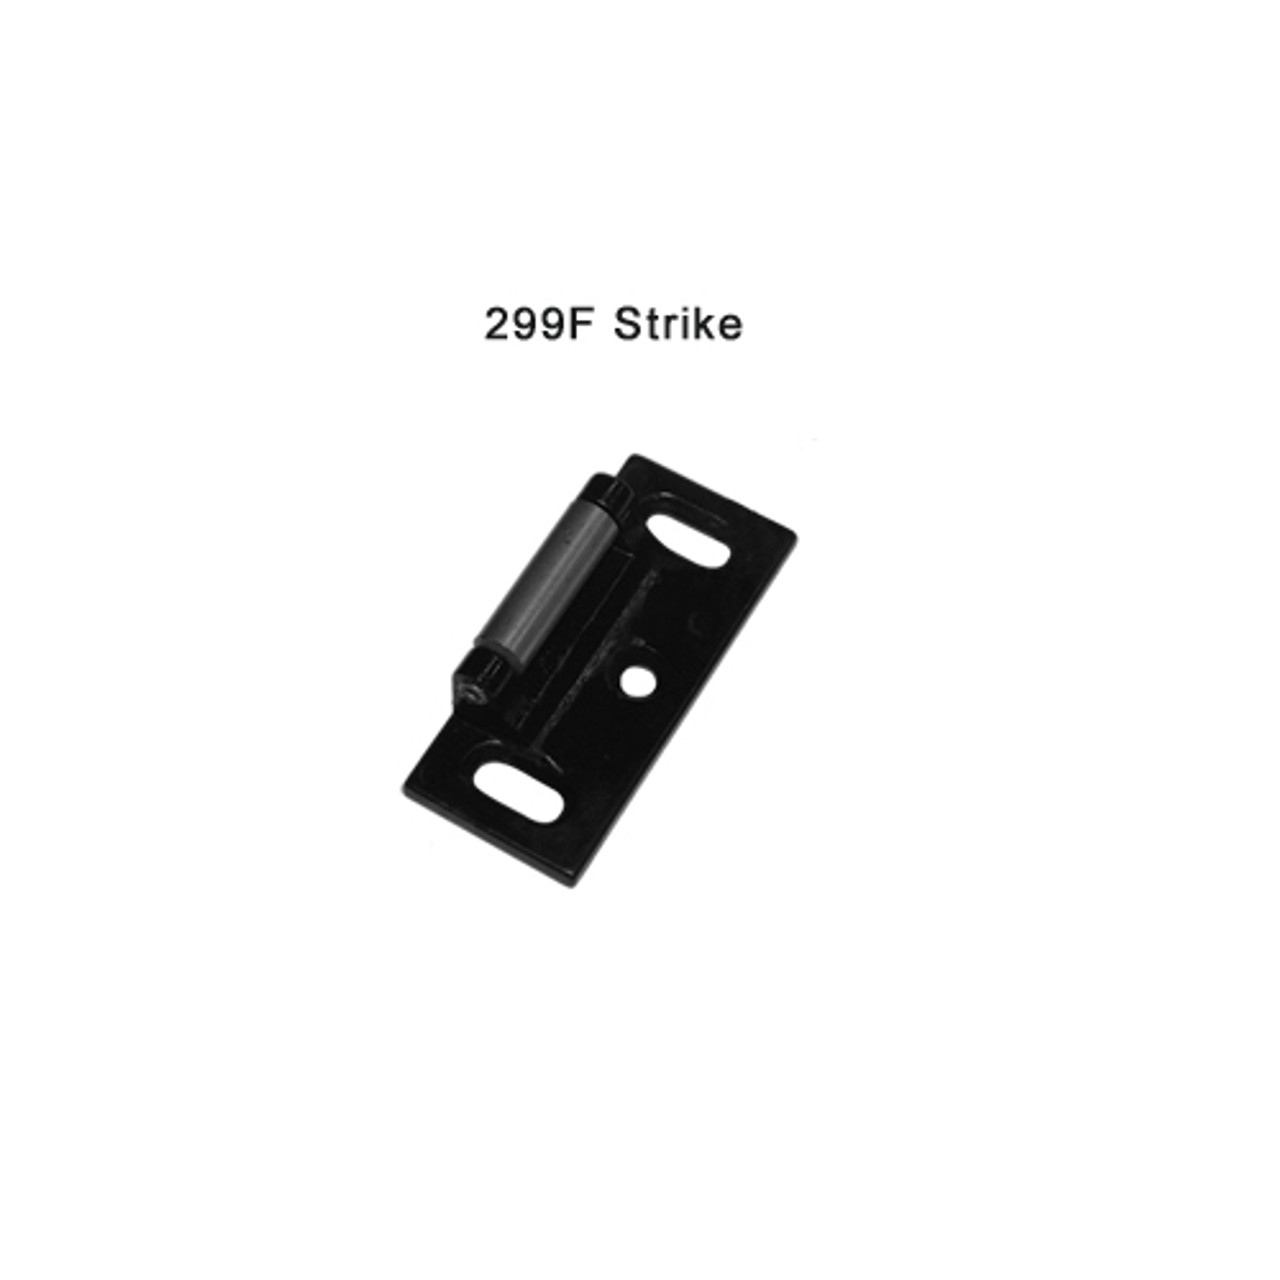 F-25-R-TP-US28-3 Falcon 25 Series Fire Rated Rim Exit Device with 512TP Thumbpiece Trim in Anodized Aluminum